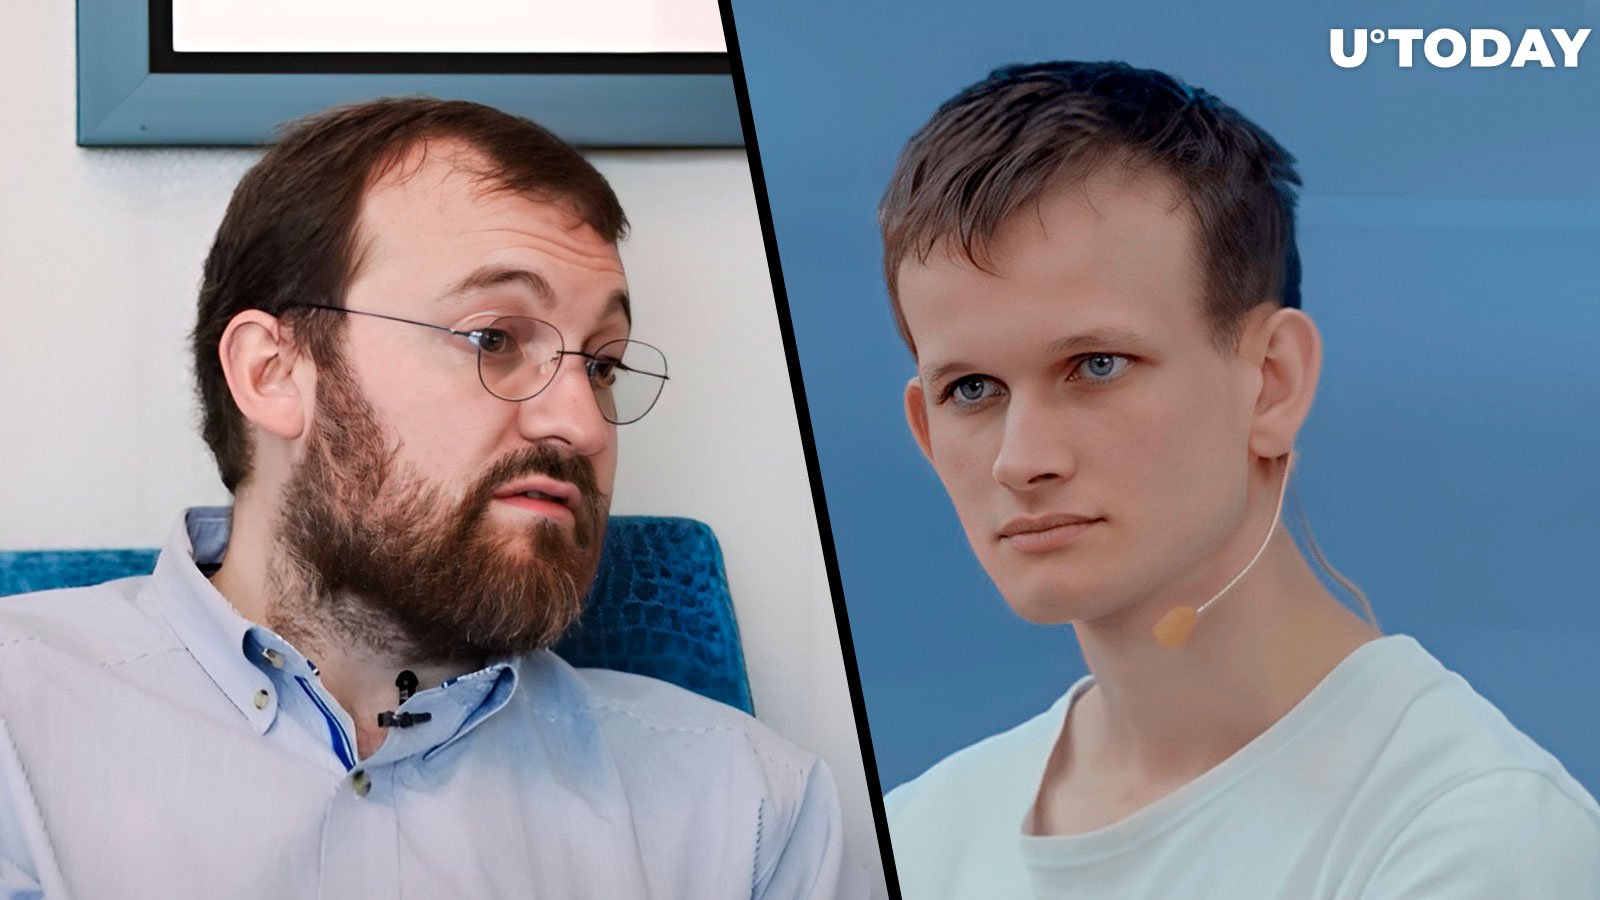 Ethereum's Vitalik Buterin Attracts More Criticism from Cardano's Hoskinson